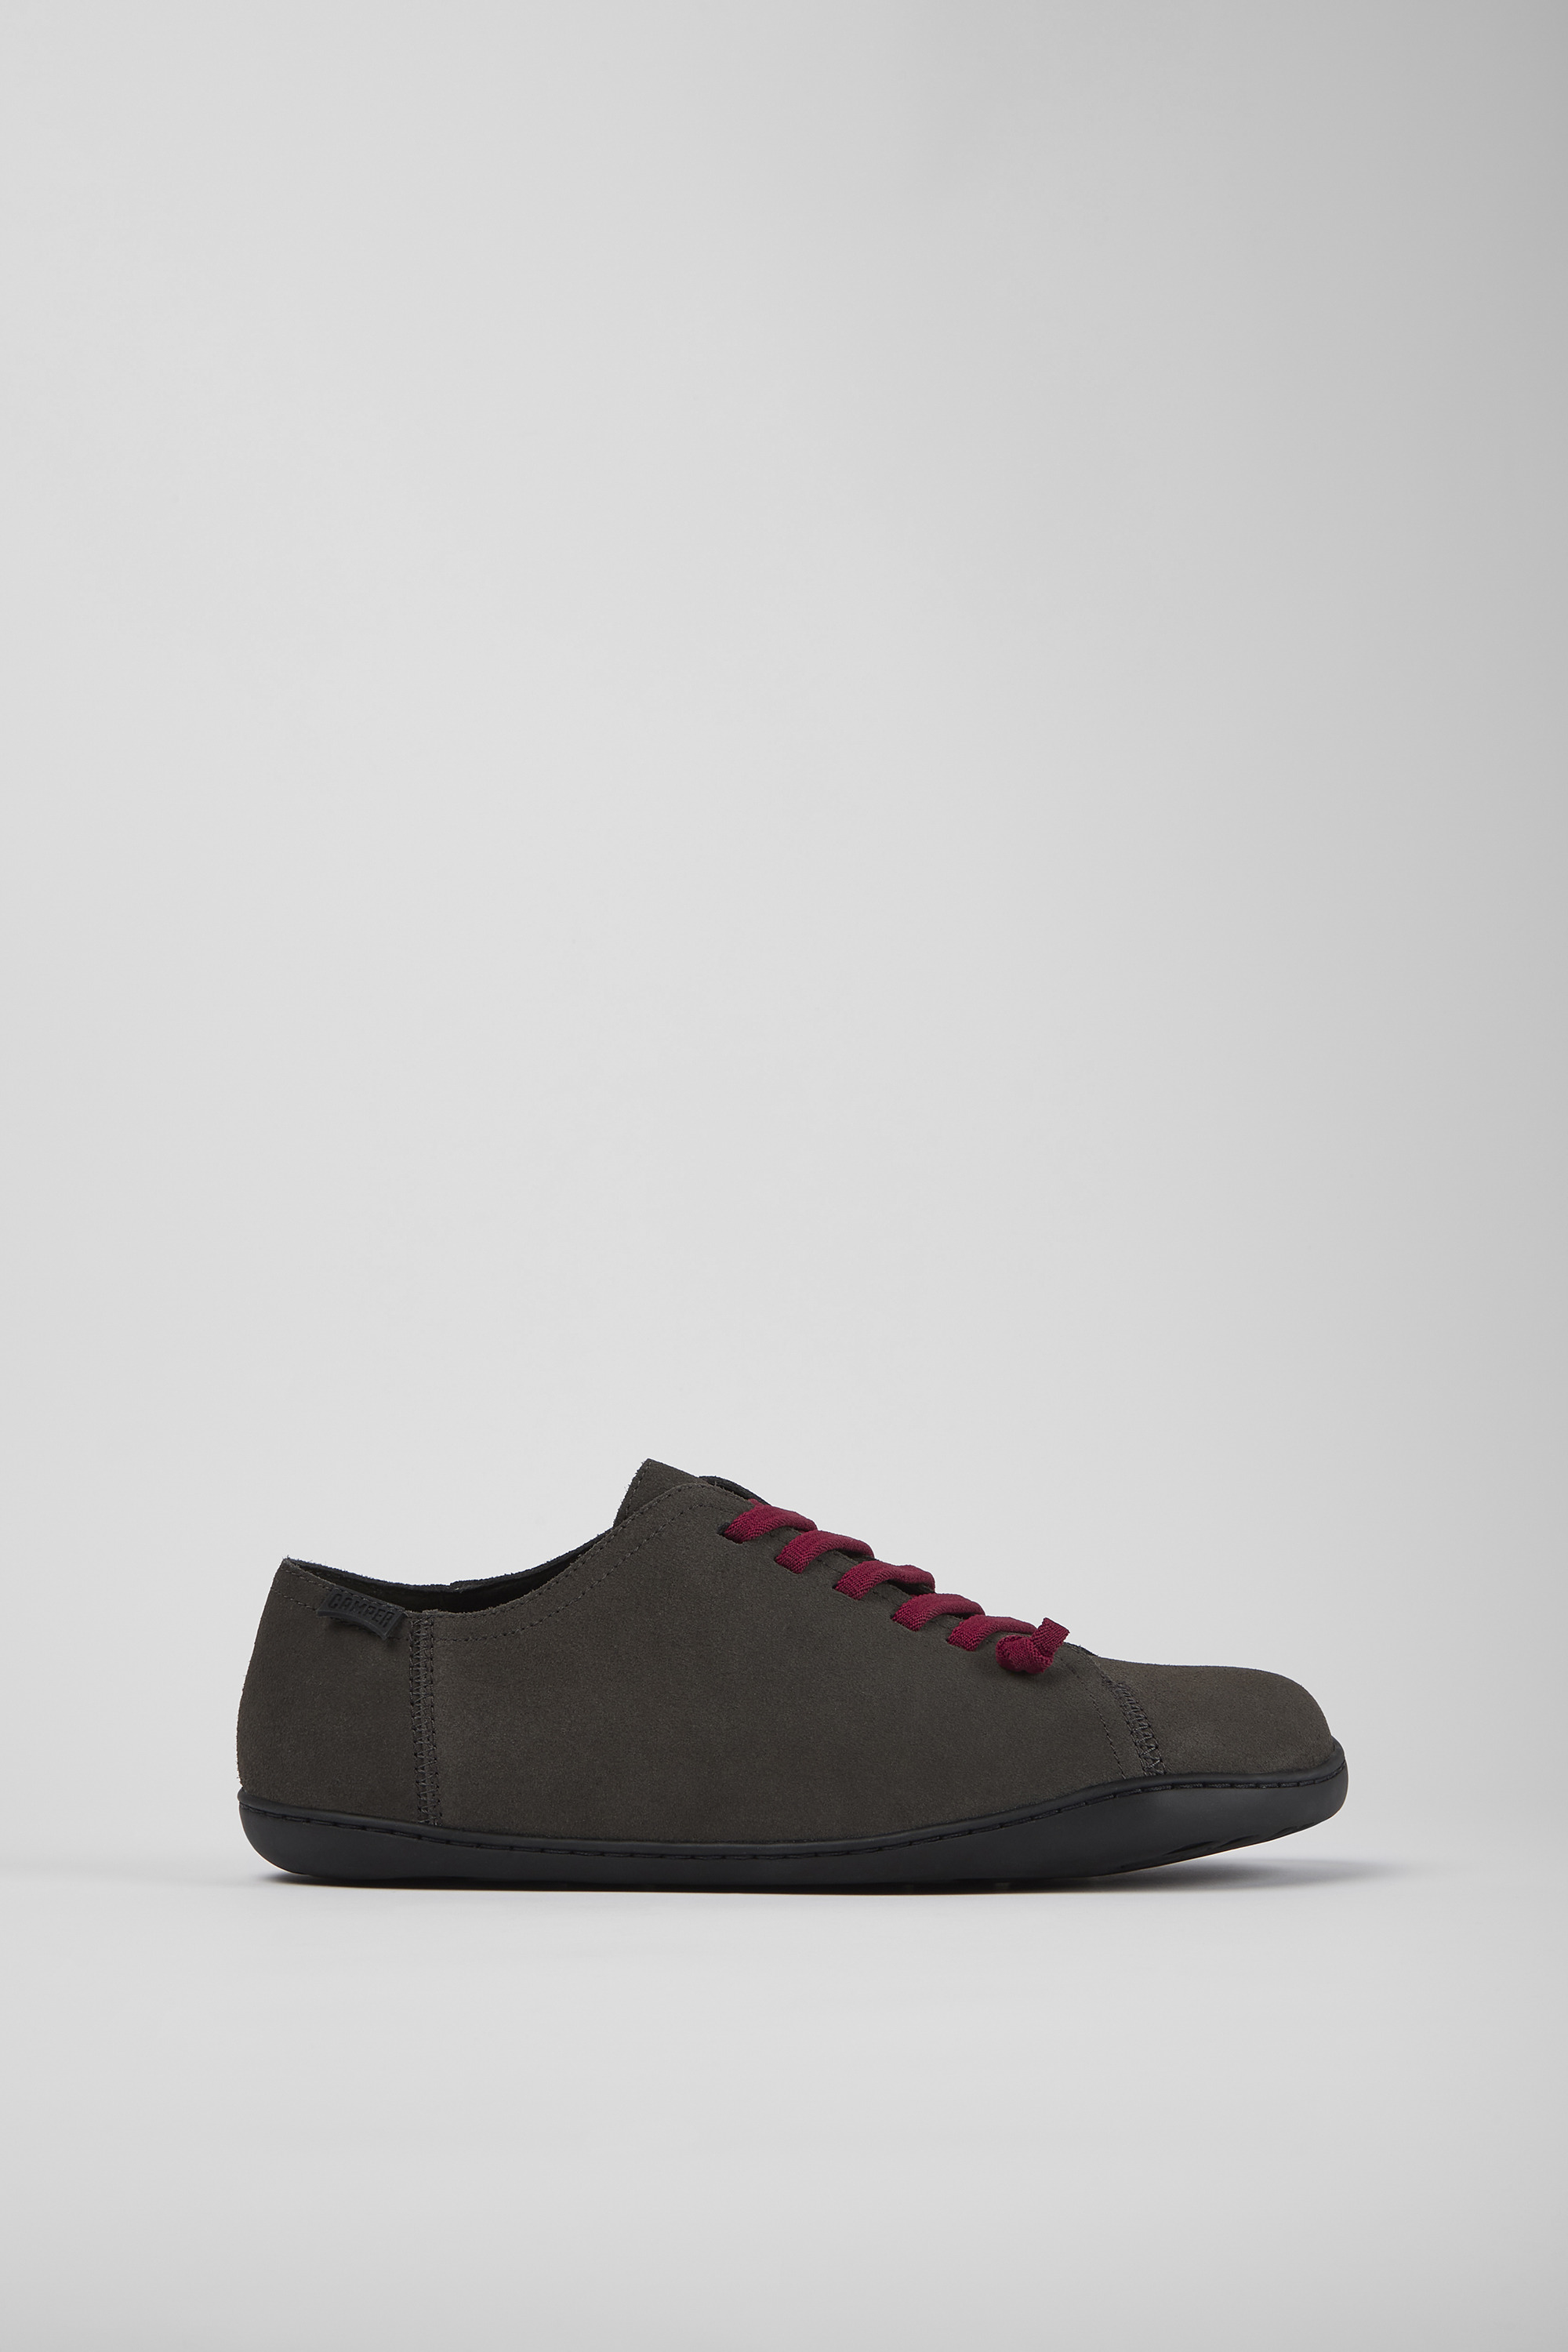 Tenis Casuales Hombre Camper THW0 Gris Taupe - Freeport